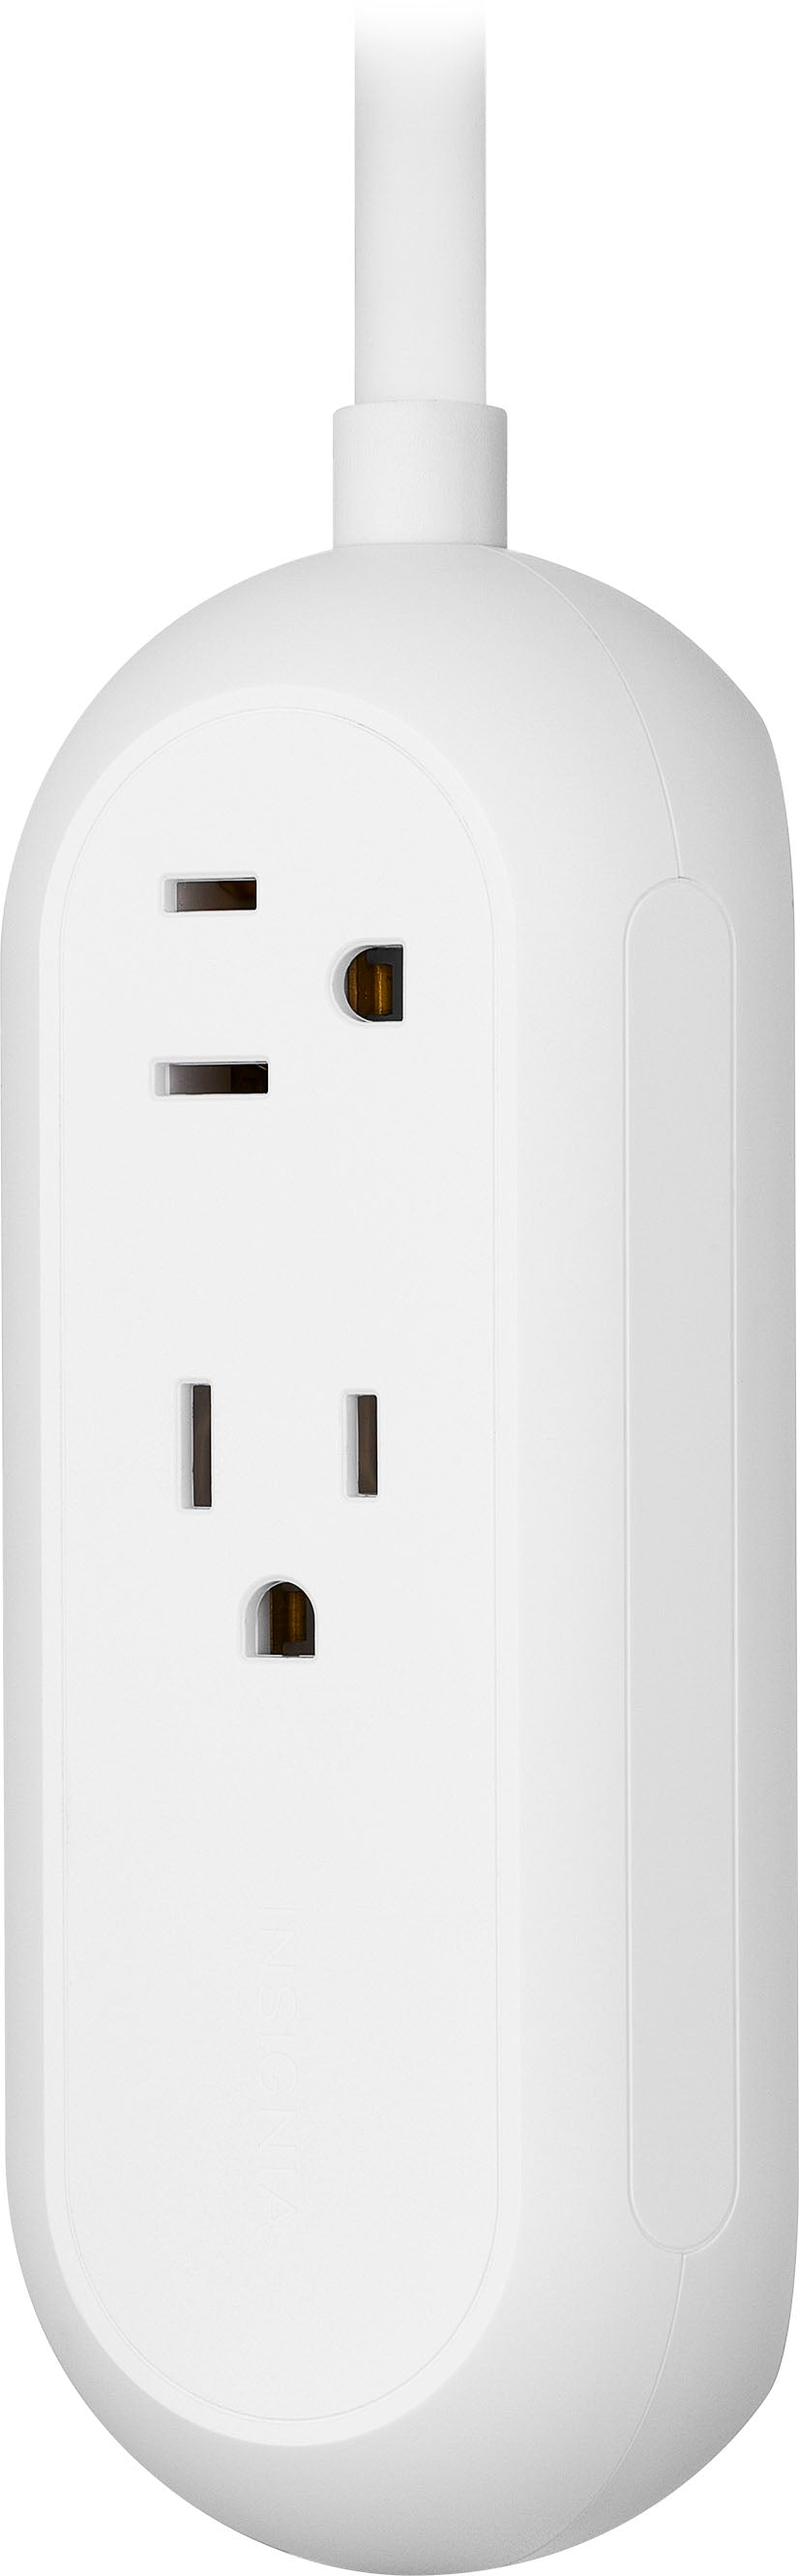 Insignia™ - 6-in-1 70W Charging Station Power Strip - White_1